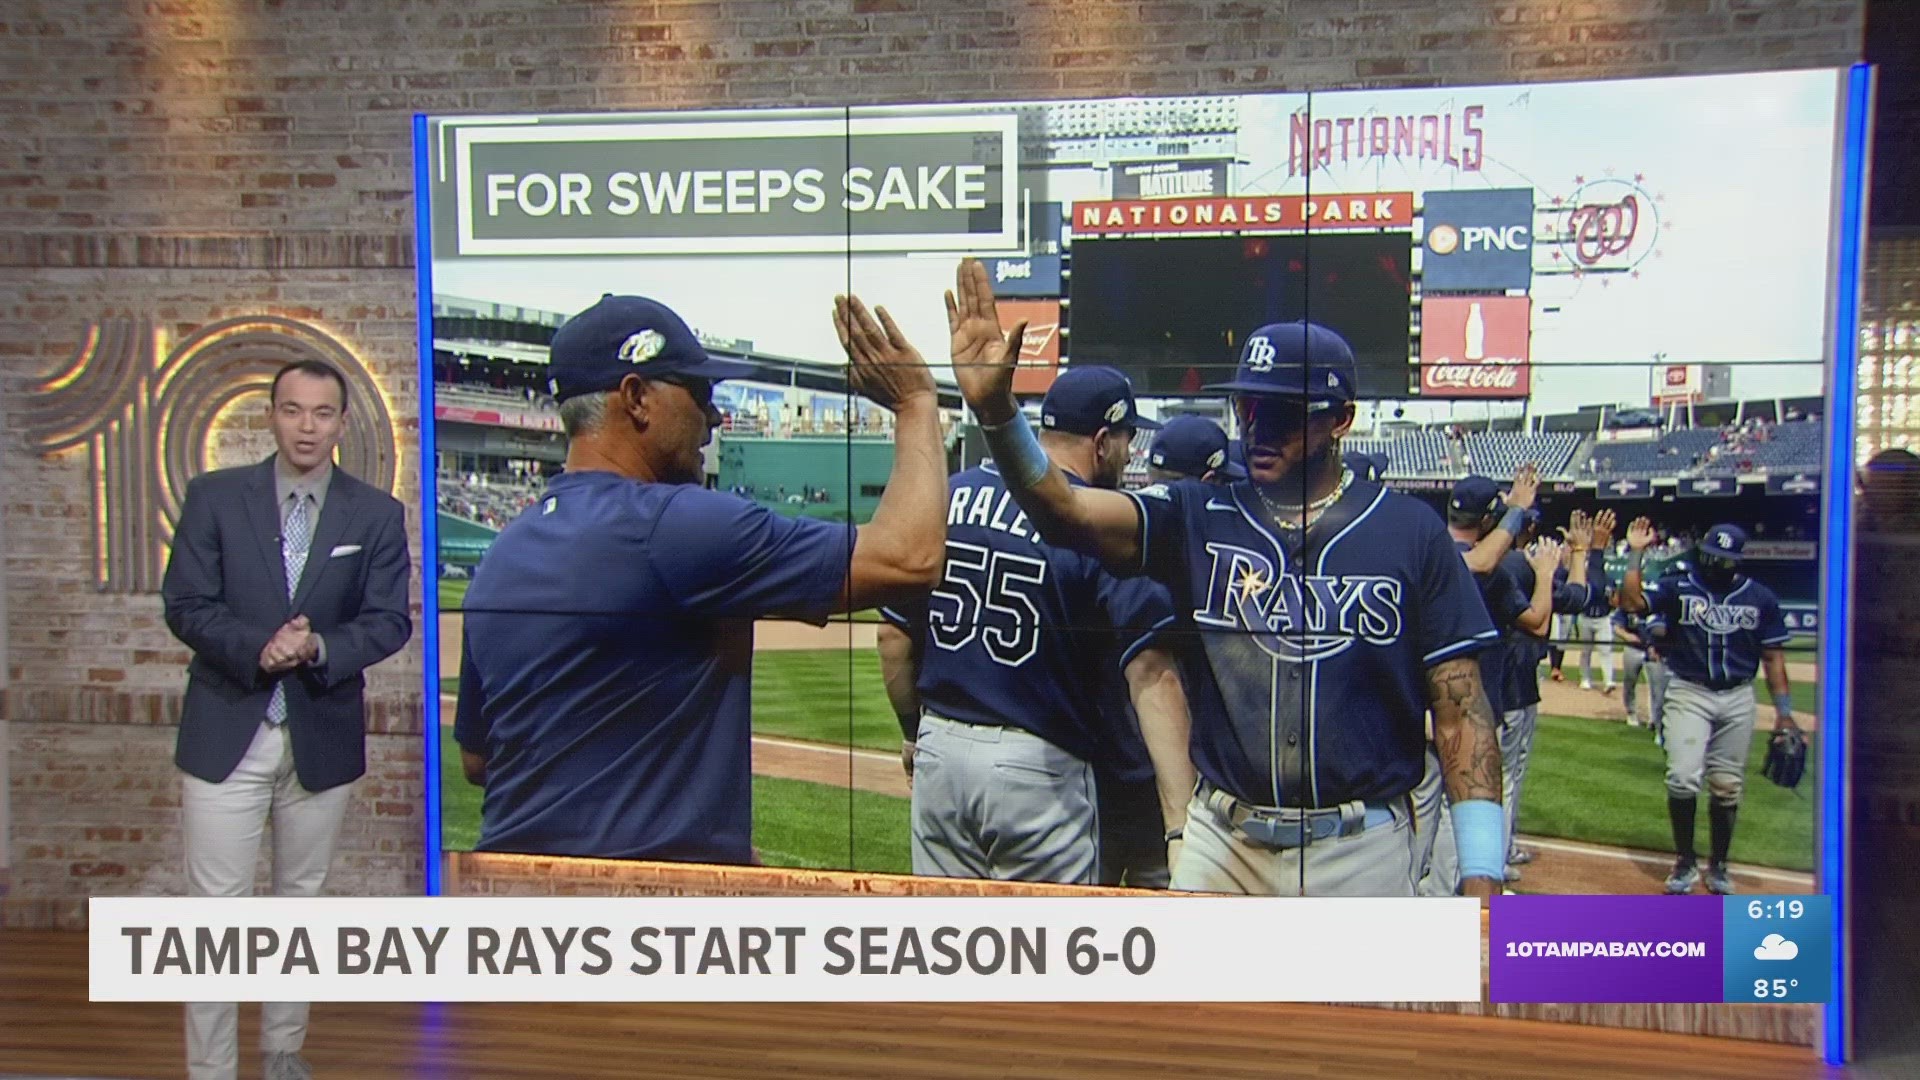 The Rays improved to 6-0 and extended the best start in franchise history.